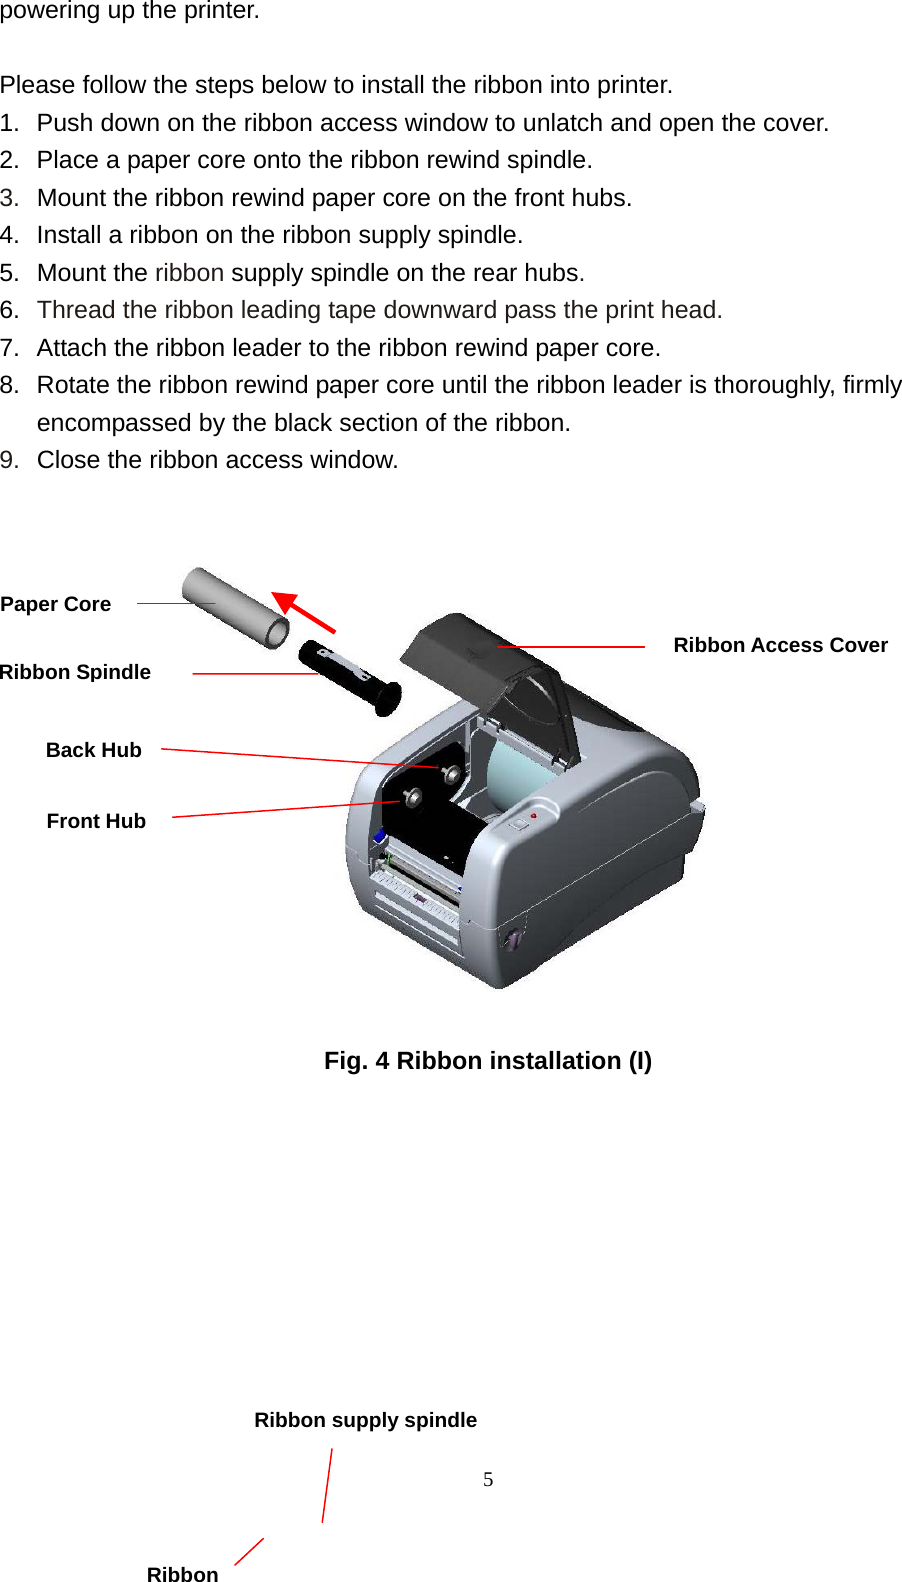  5powering up the printer.  Please follow the steps below to install the ribbon into printer. 1.  Push down on the ribbon access window to unlatch and open the cover. 2.  Place a paper core onto the ribbon rewind spindle. 3.  Mount the ribbon rewind paper core on the front hubs. 4.  Install a ribbon on the ribbon supply spindle. 5. Mount the ribbon supply spindle on the rear hubs. 6.  Thread the ribbon leading tape downward pass the print head. 7.  Attach the ribbon leader to the ribbon rewind paper core. 8.  Rotate the ribbon rewind paper core until the ribbon leader is thoroughly, firmly encompassed by the black section of the ribbon. 9.  Close the ribbon access window.                                   Fig. 4 Ribbon installation (I)          Ribbon Spindle Front Hub Paper Core Back Hub Ribbon Access CoverRibbon  Ribbon supply spindle